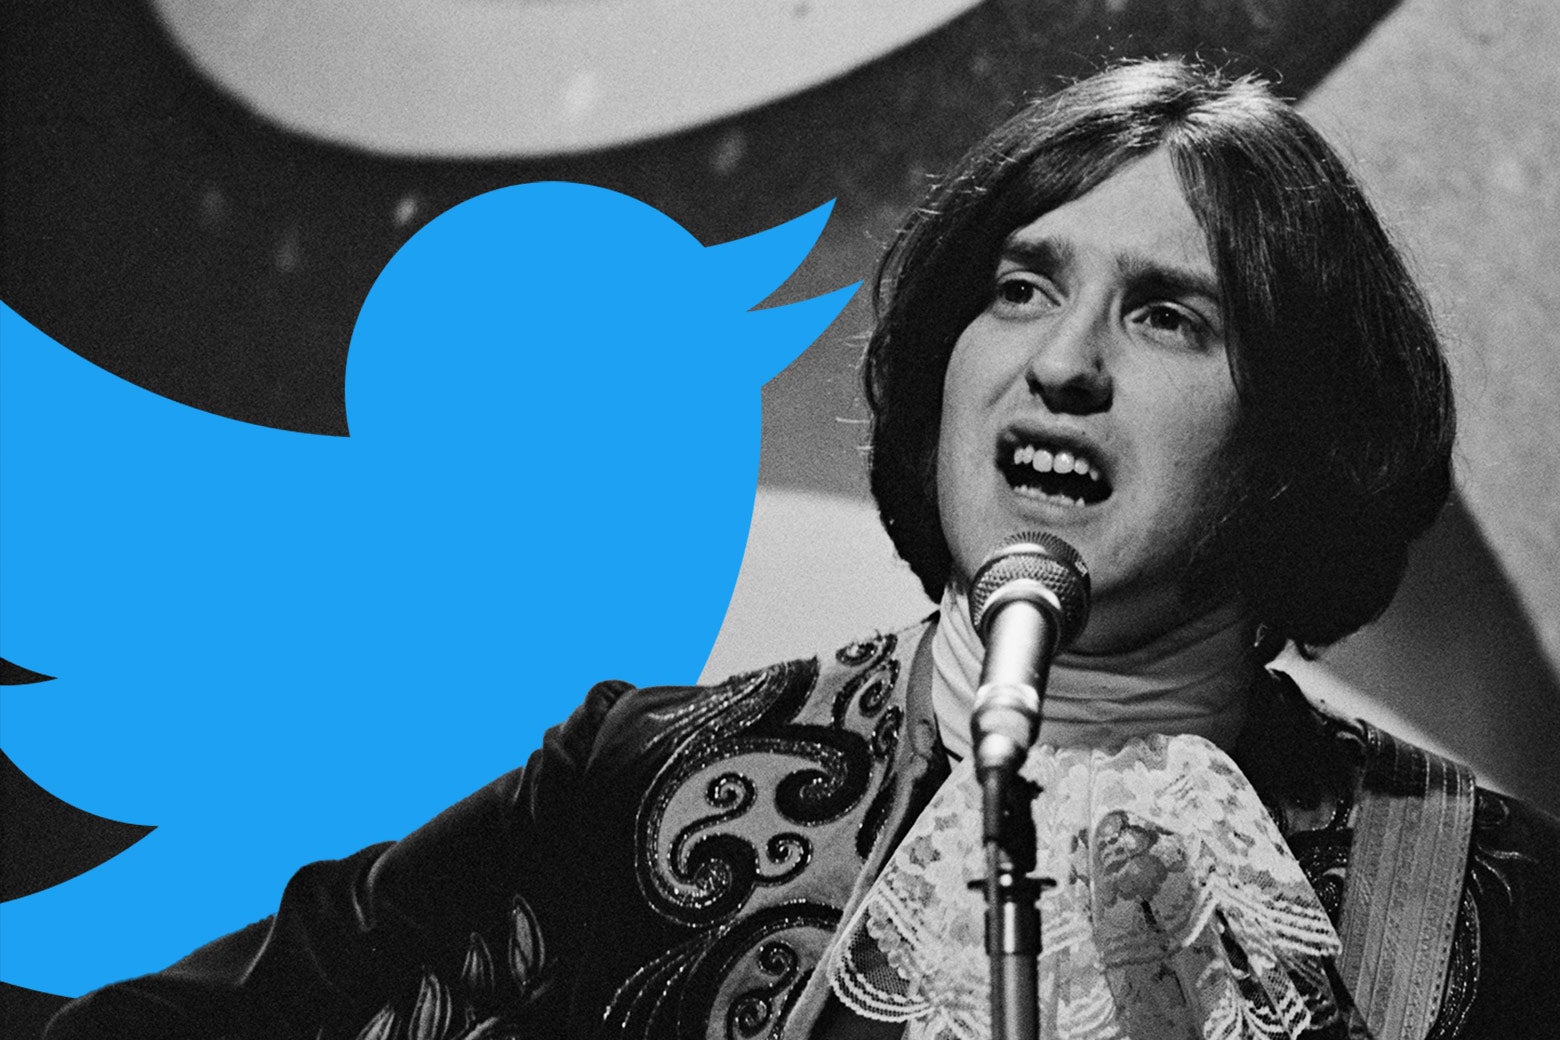 Dave Davies singing into a microphone next to a Twitter bird.